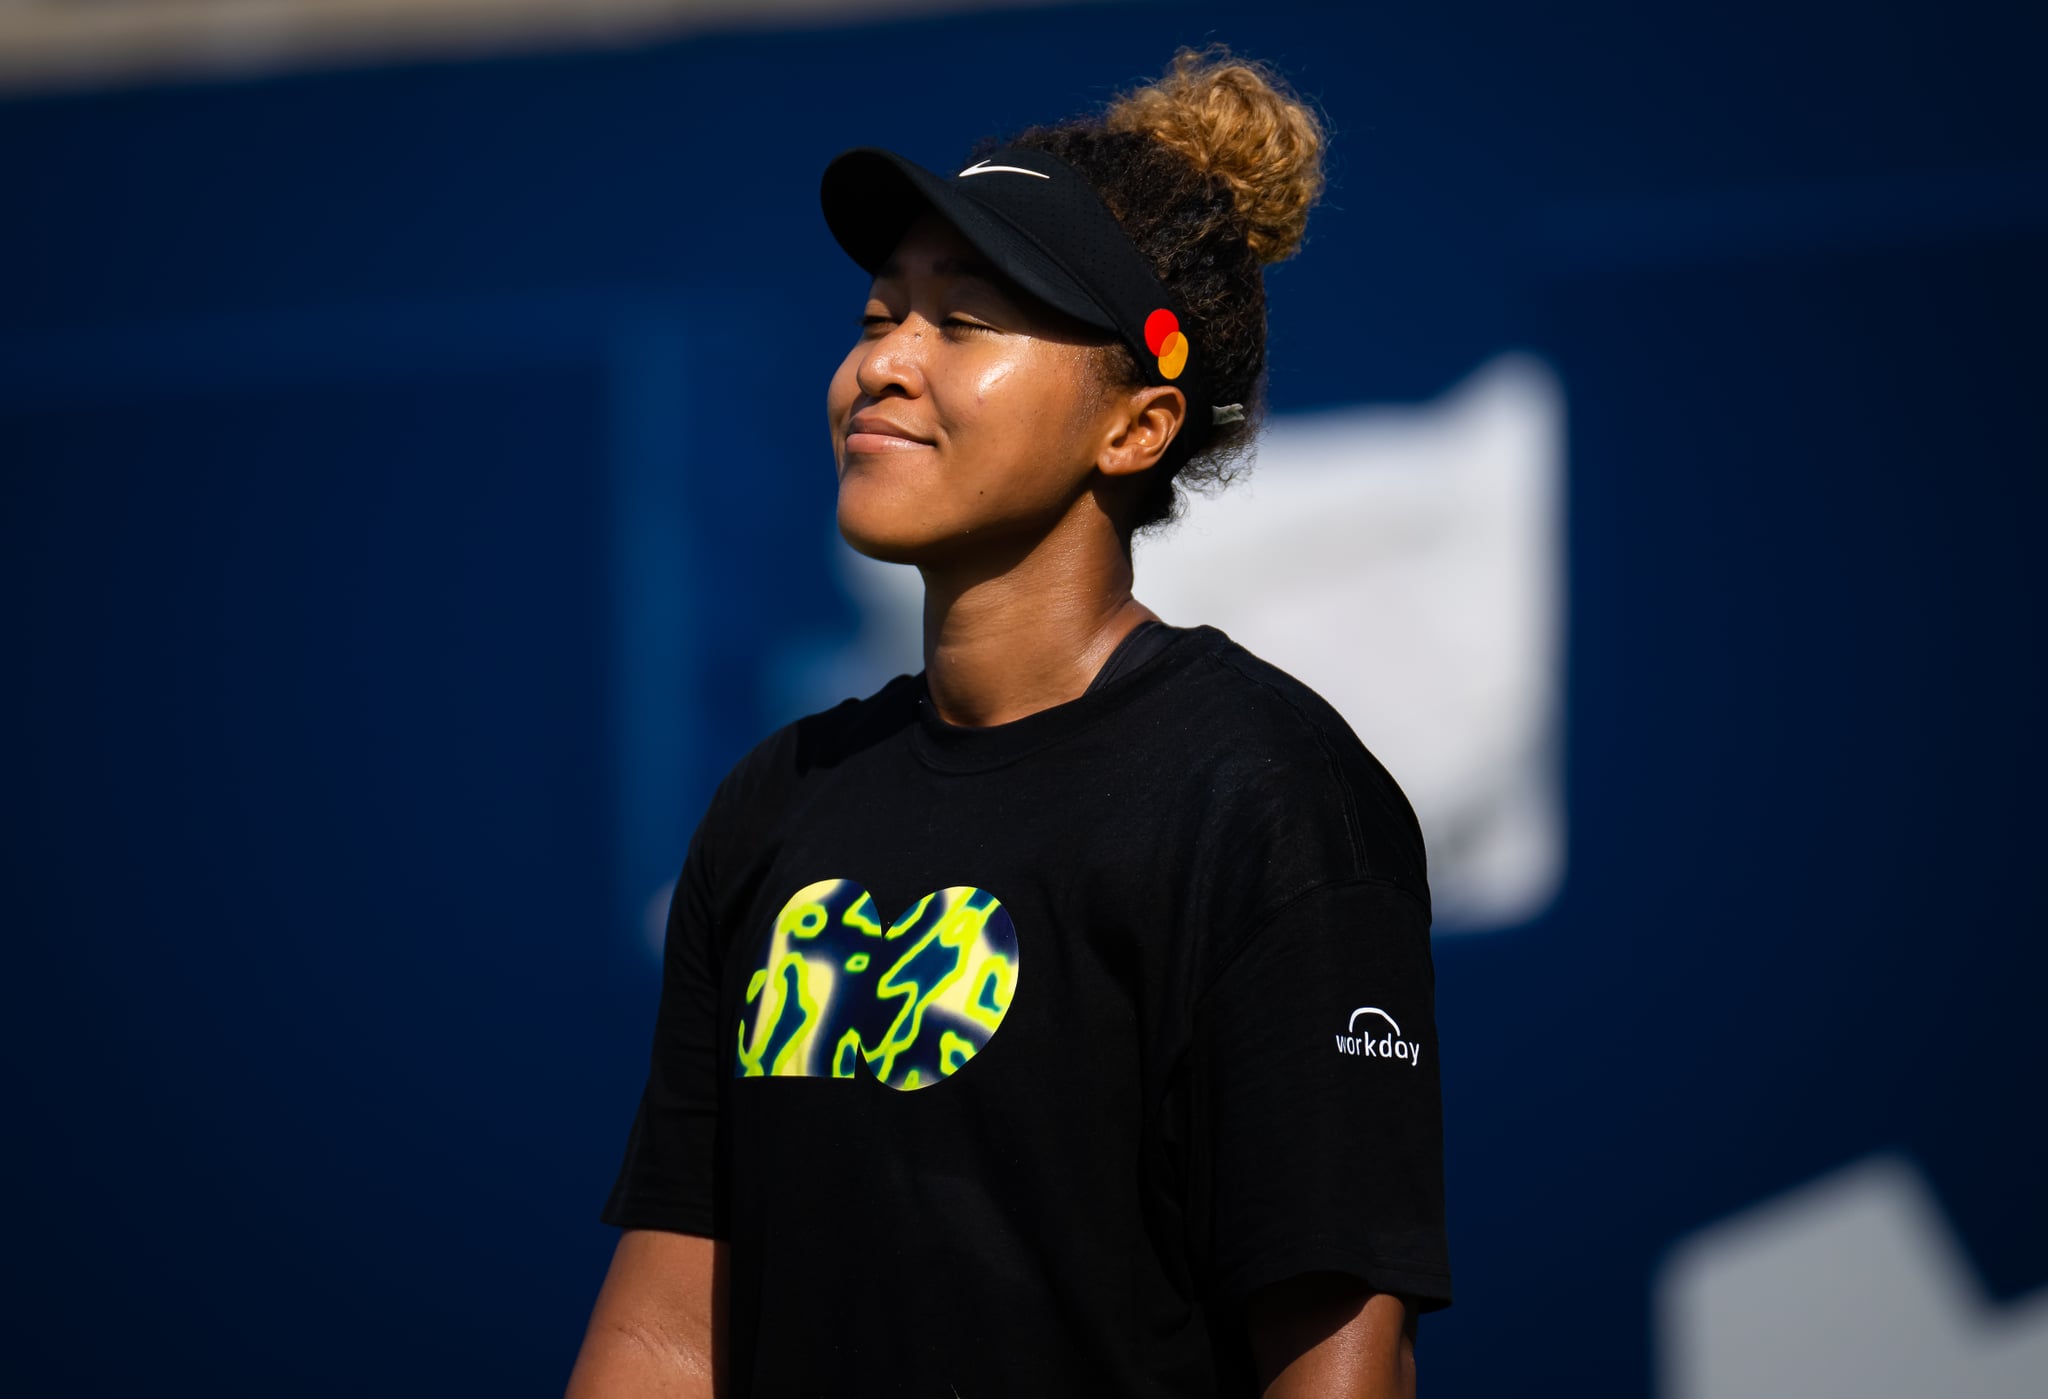 TORONTO, ONTARIO - AUGUST 07: Naomi Osaka of Japan during practice on Day 2 of the National Bank Open, part of the Hologic WTA Tour, at Sobeys Stadium on August 07, 2022 in Toronto, Ontario (Photo by Robert Prange/Getty Images)